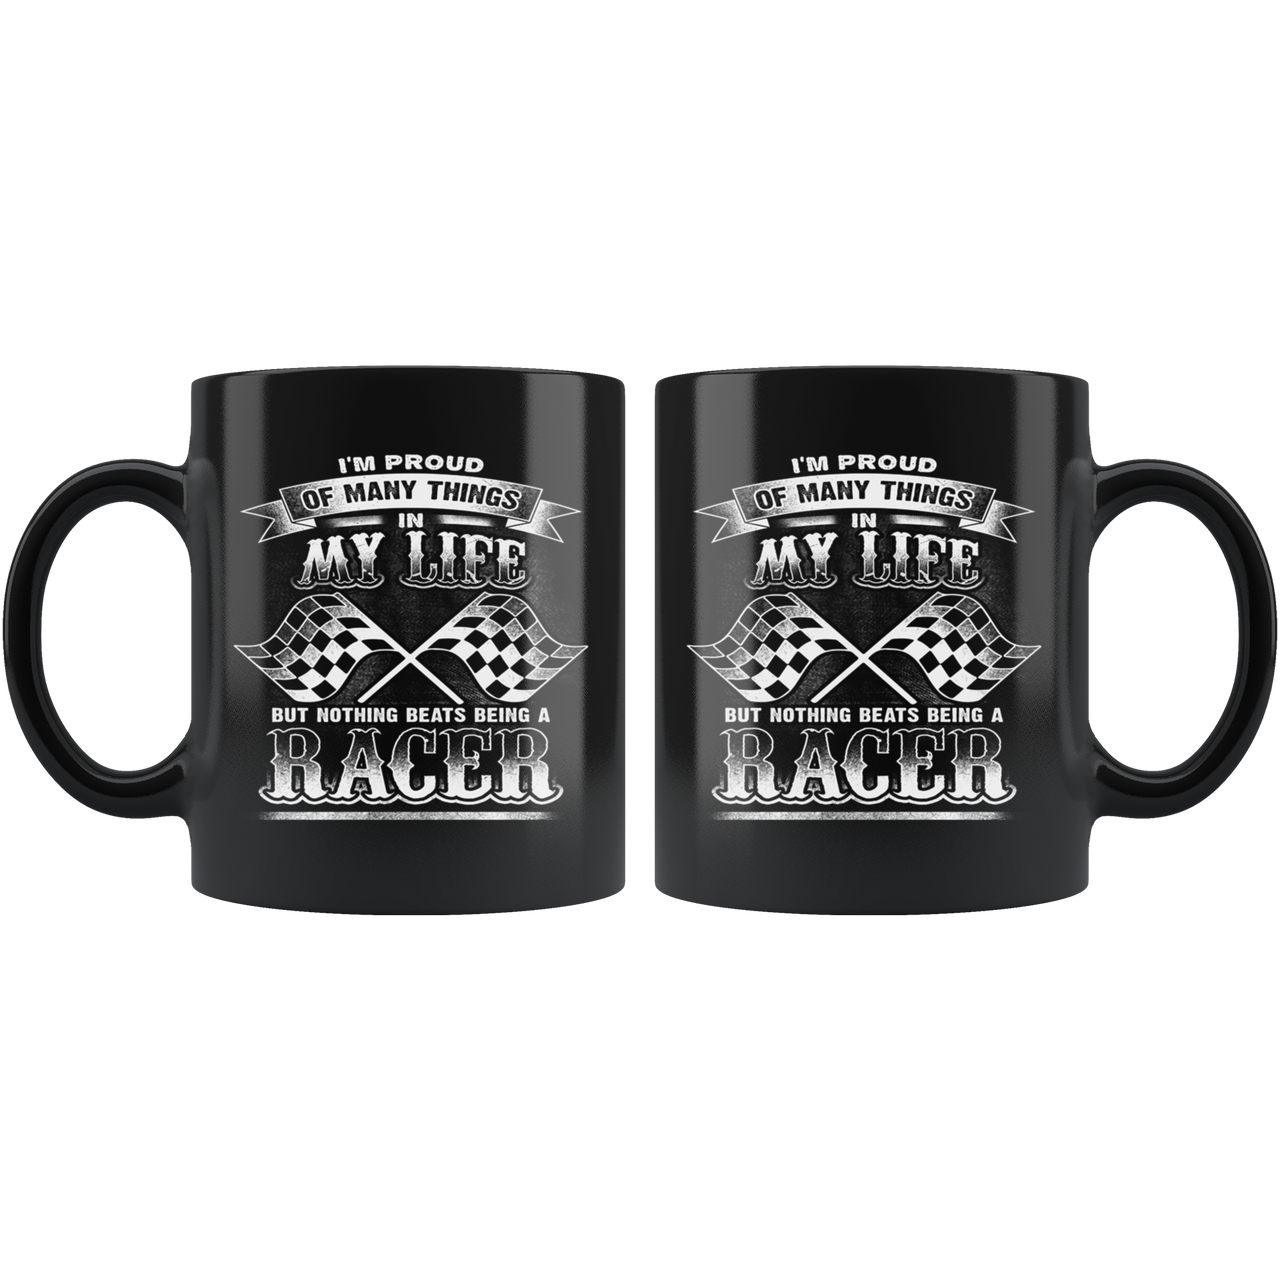 I'm Proud Of Many Things In My Life But Nothing Beats Being A Racer Mug!